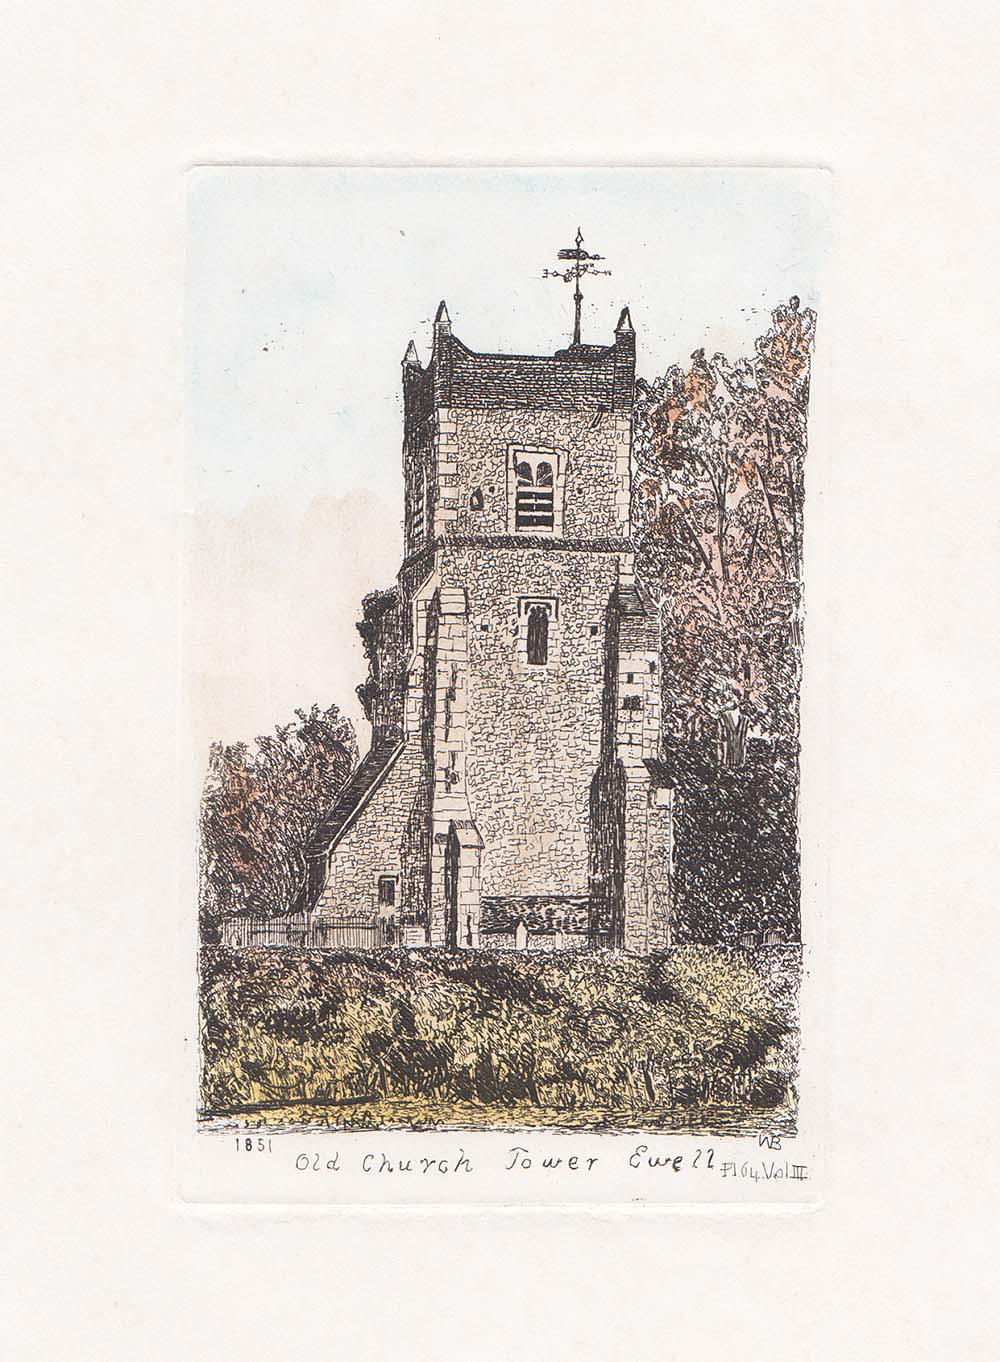 Old Church Tower Ewell